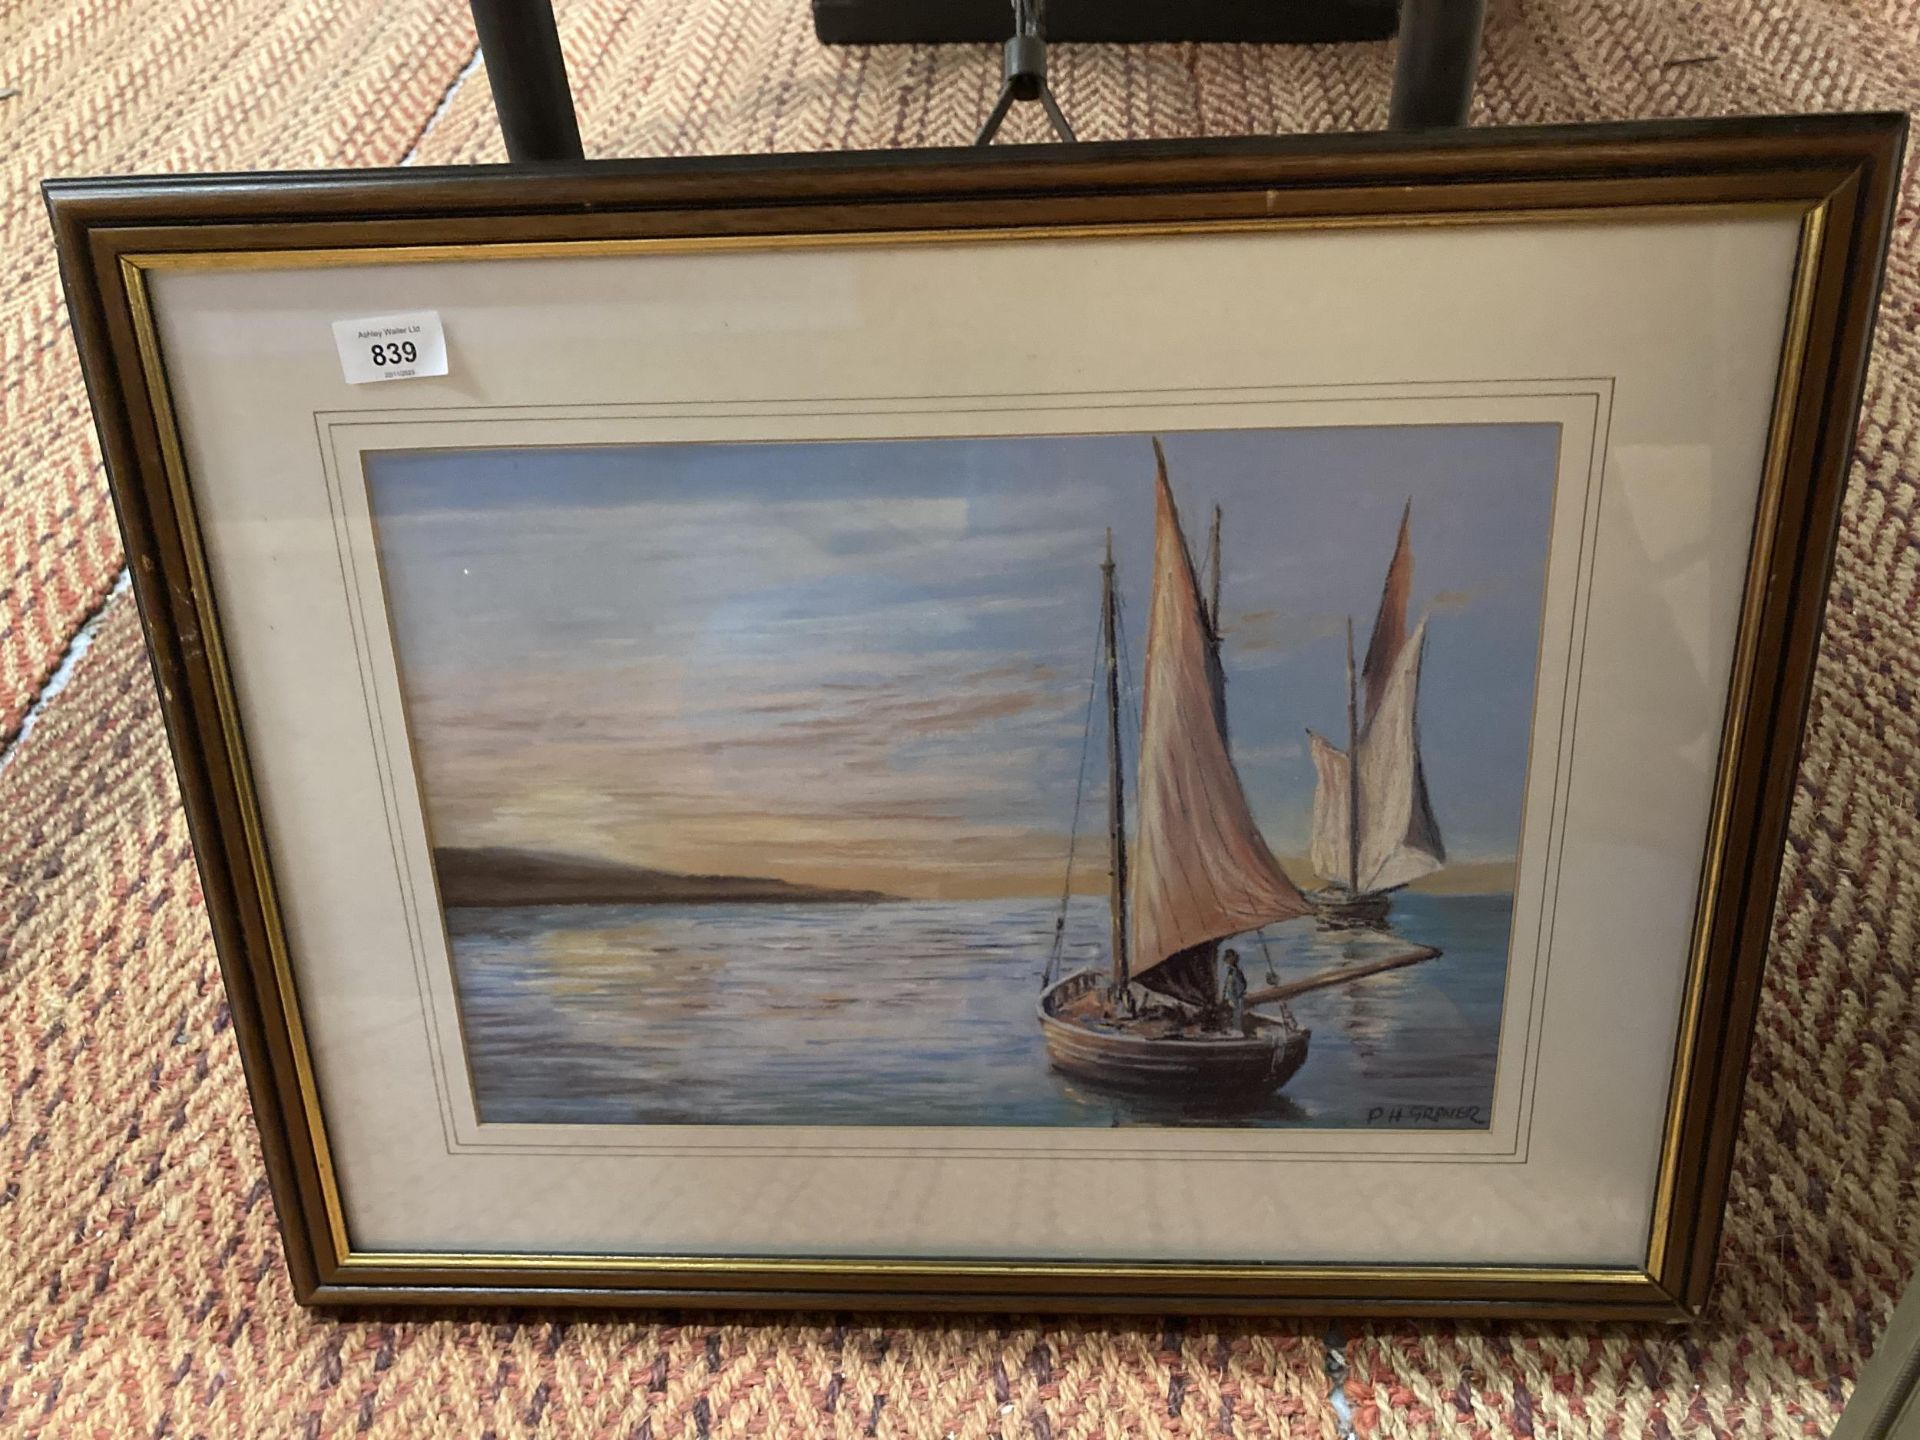 PERCY GRAVER (BRITISH, BORN 1943) 'SETTING SAIL' LIMITED EDITION (12/150), COLOURED PRINT, SIGNED